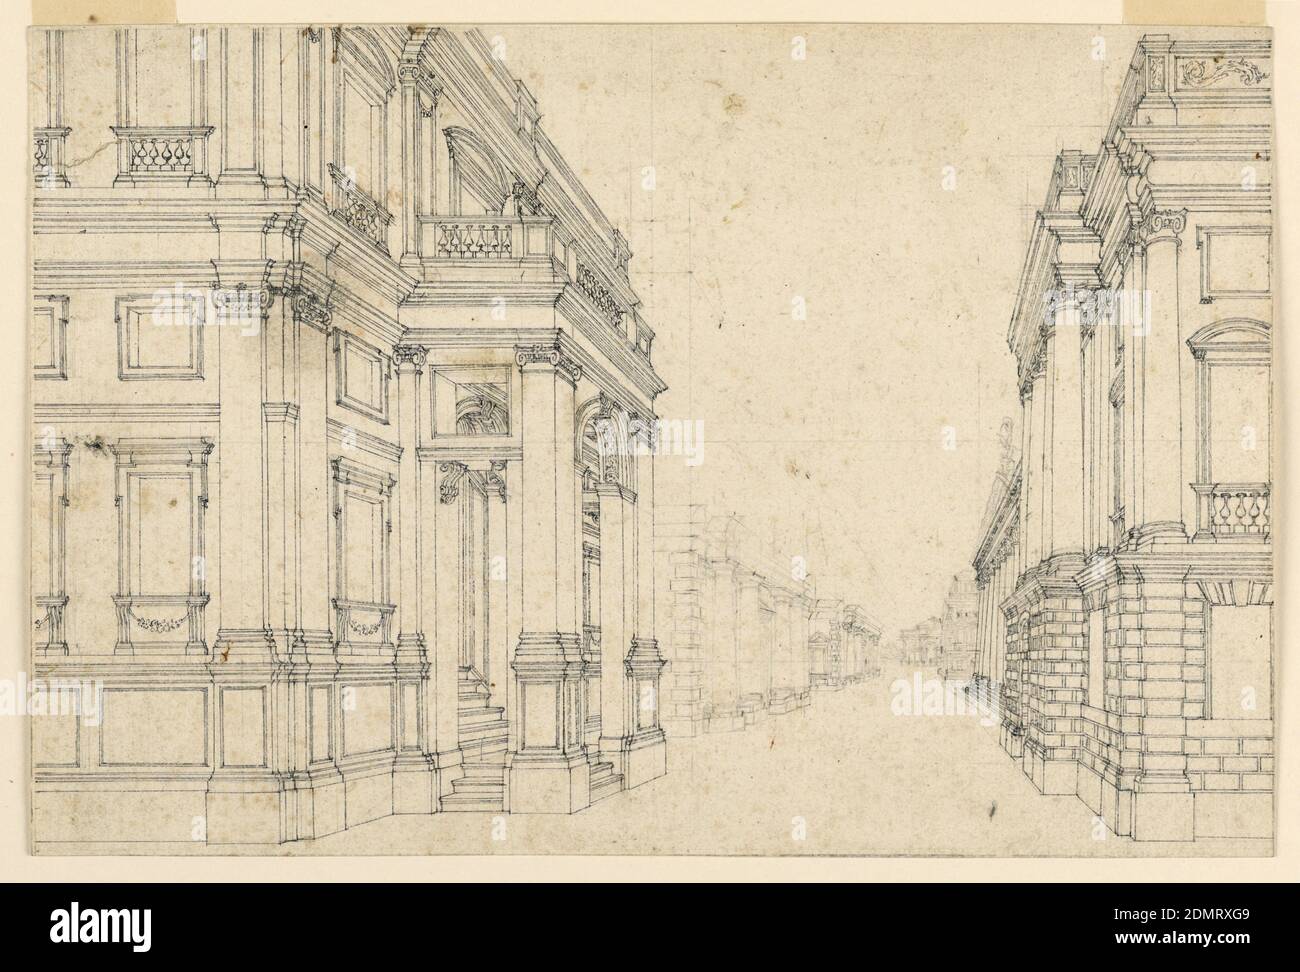 Stage Design: City Street with Palaces, Pen and black ink, pencil, Italy, late 18th century, theater, Drawing Stock Photo